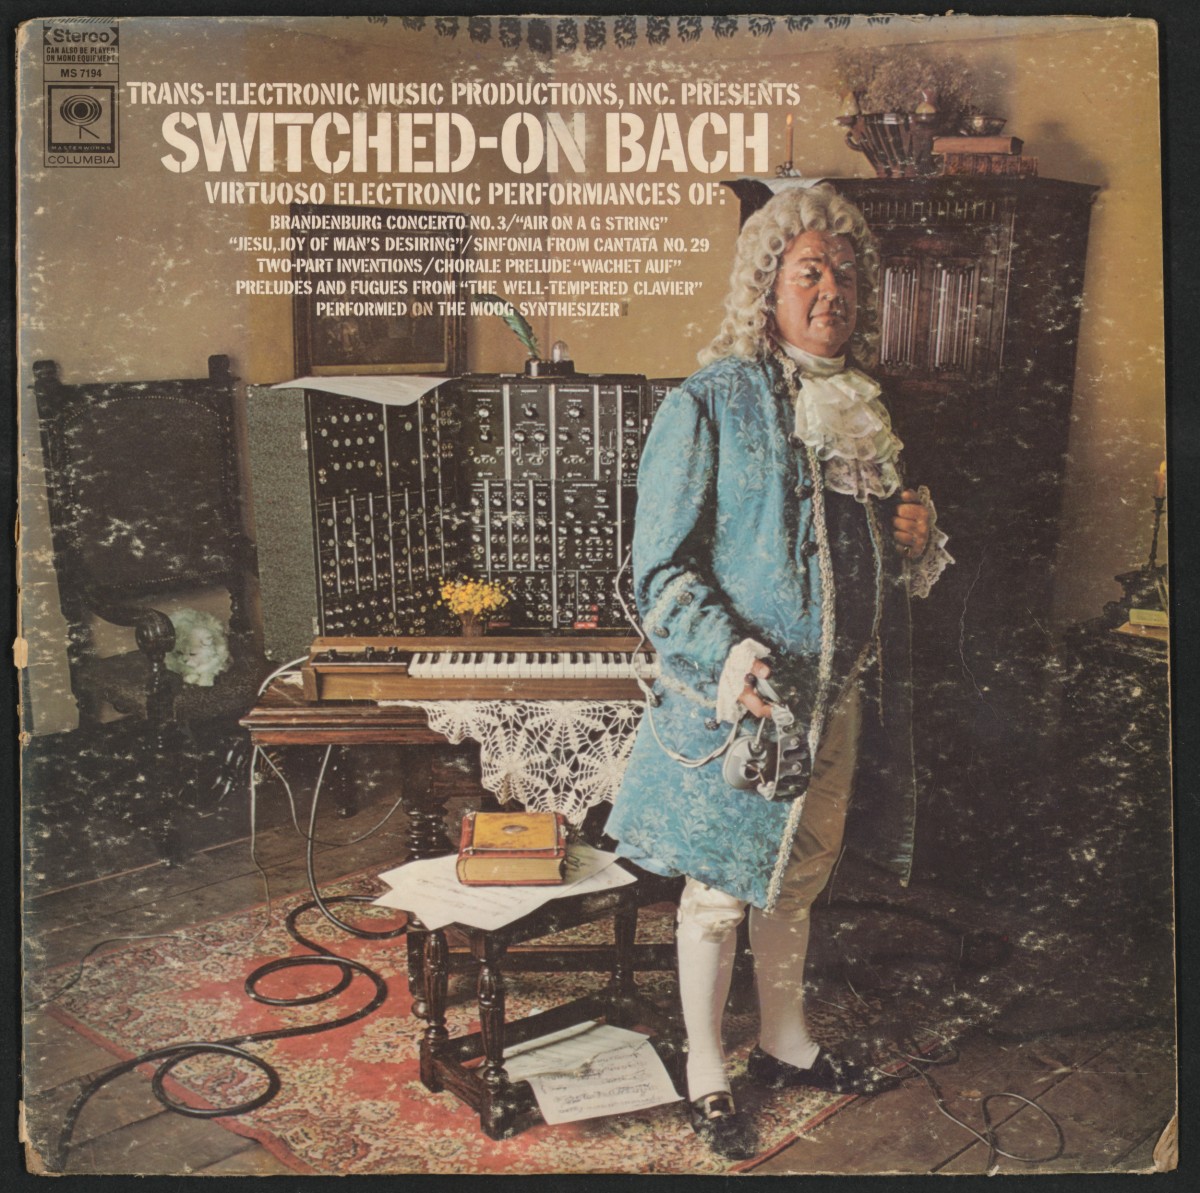 Albumcover „Switched-On Bach“ (1969): Albumcover „Switched-On Bach“ (1969)